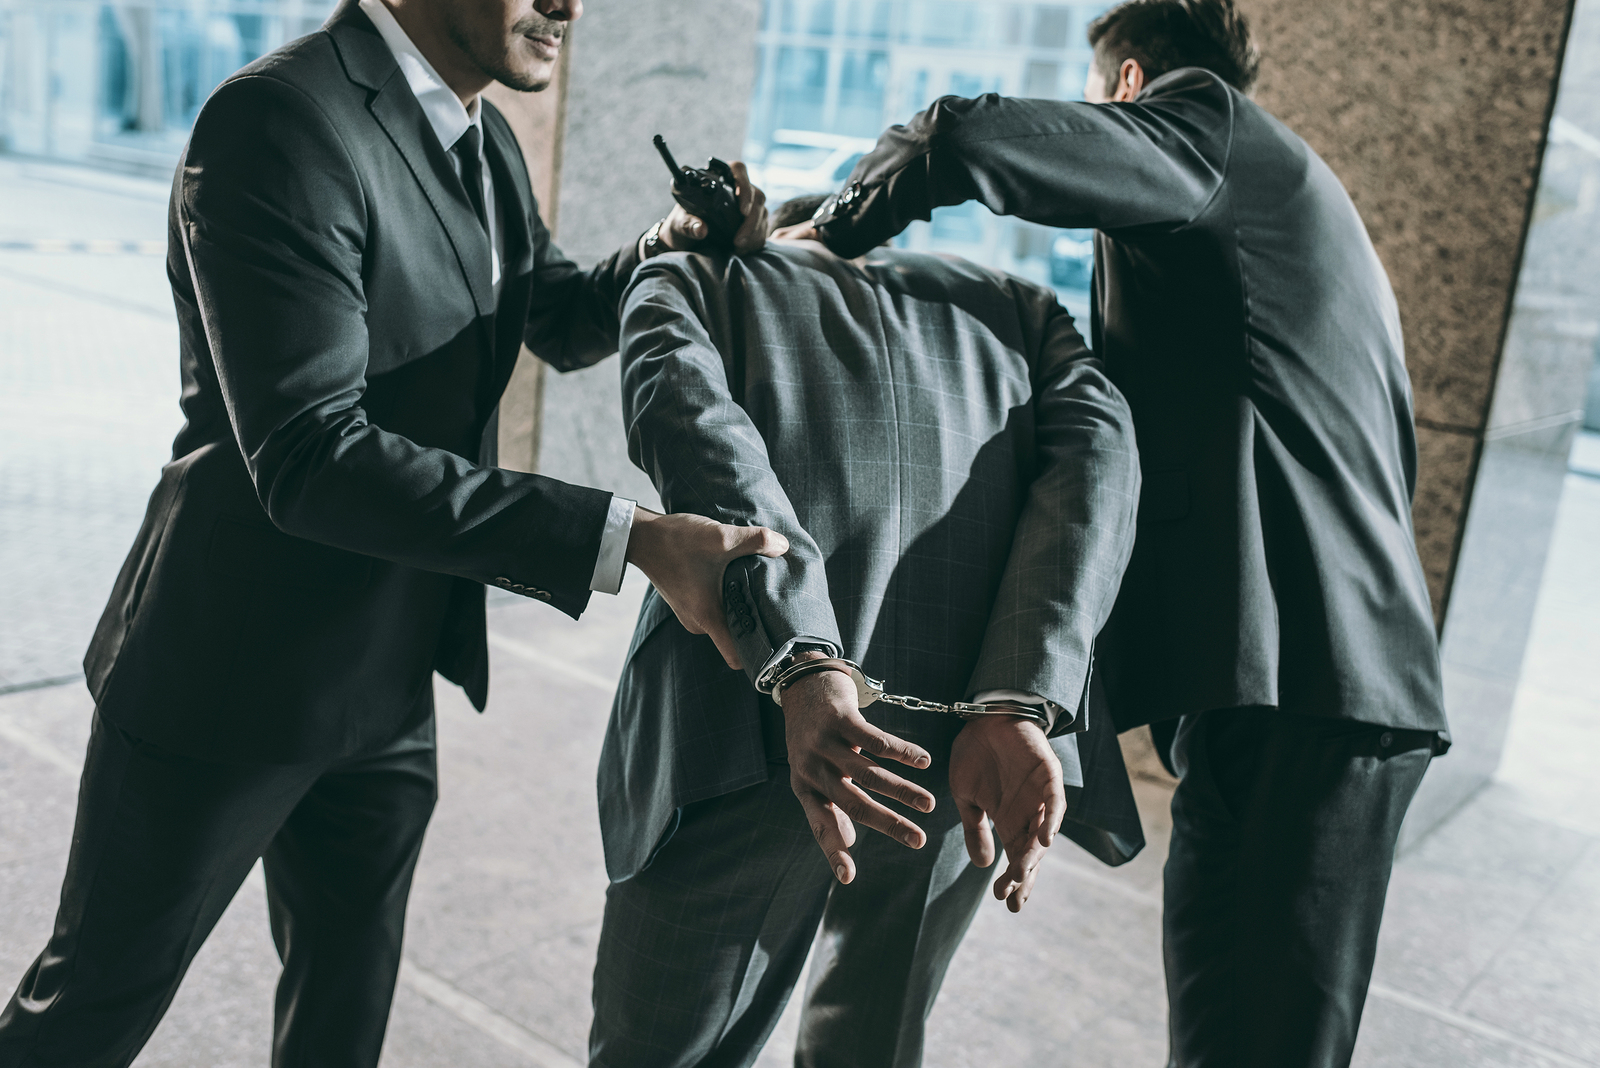 Wrongful arrest? Here’s what you need to prove